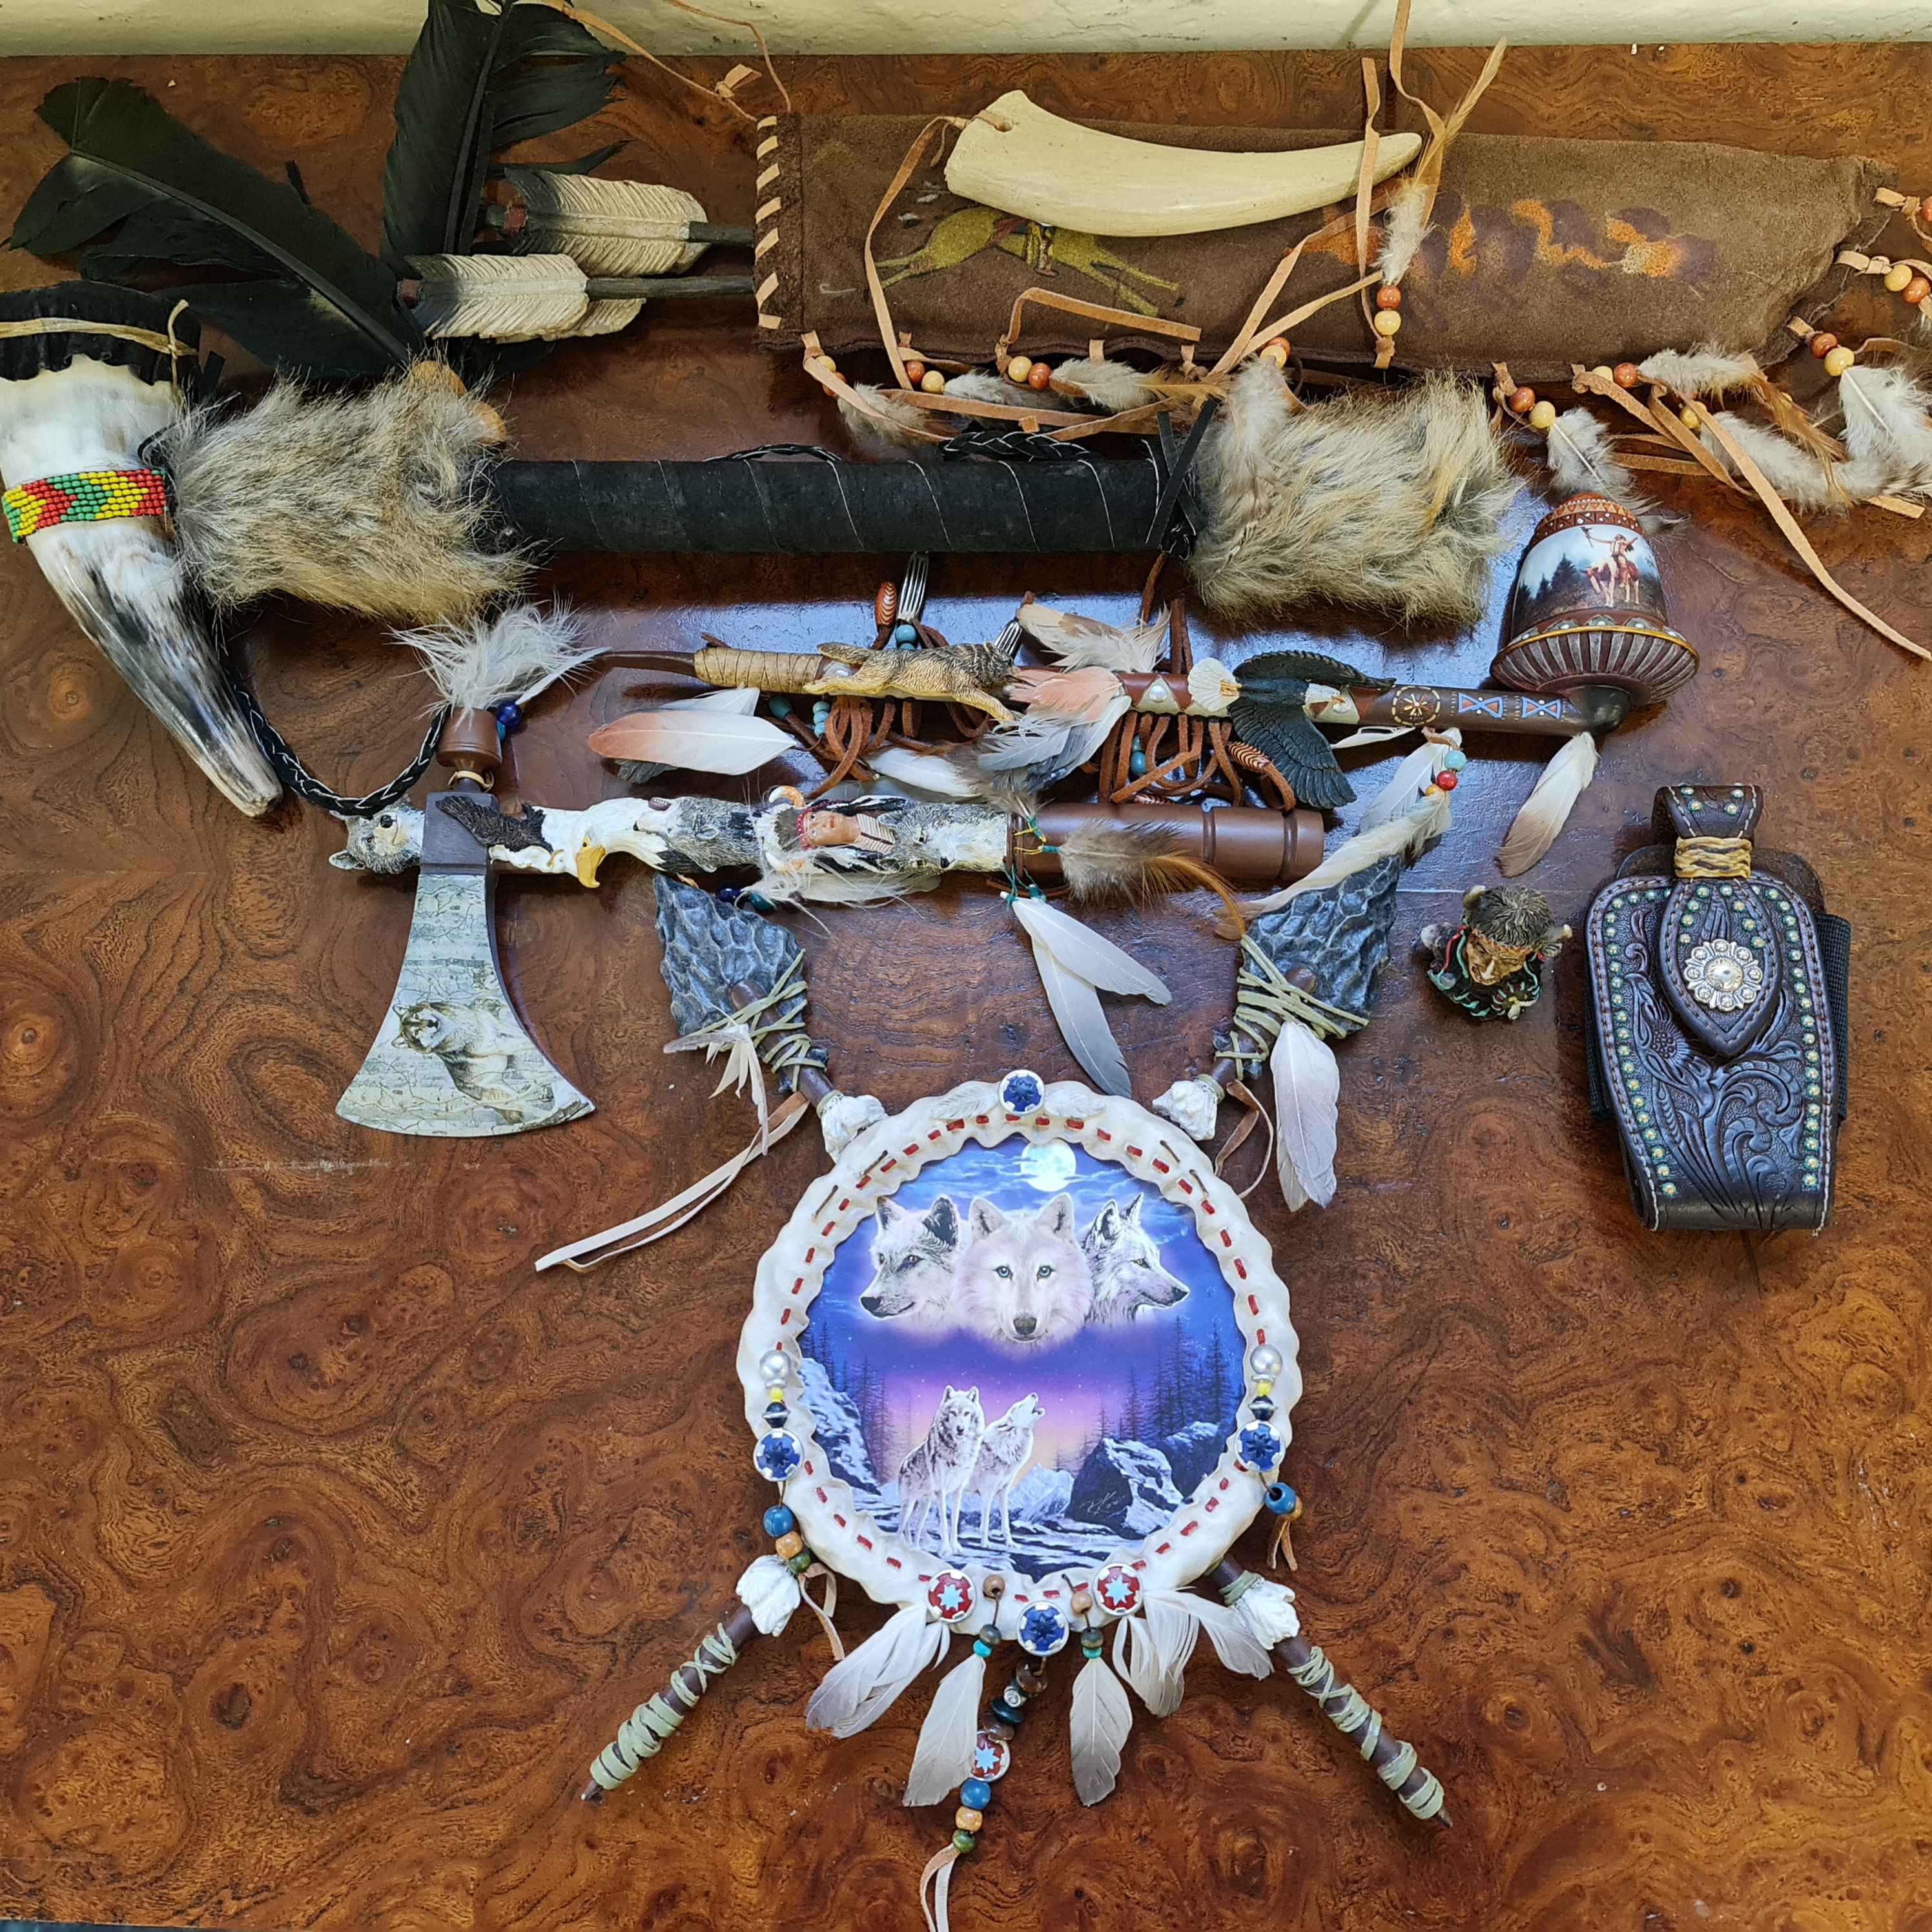 A collection of Native American related items including a war dance rattle, a quill and arrows,